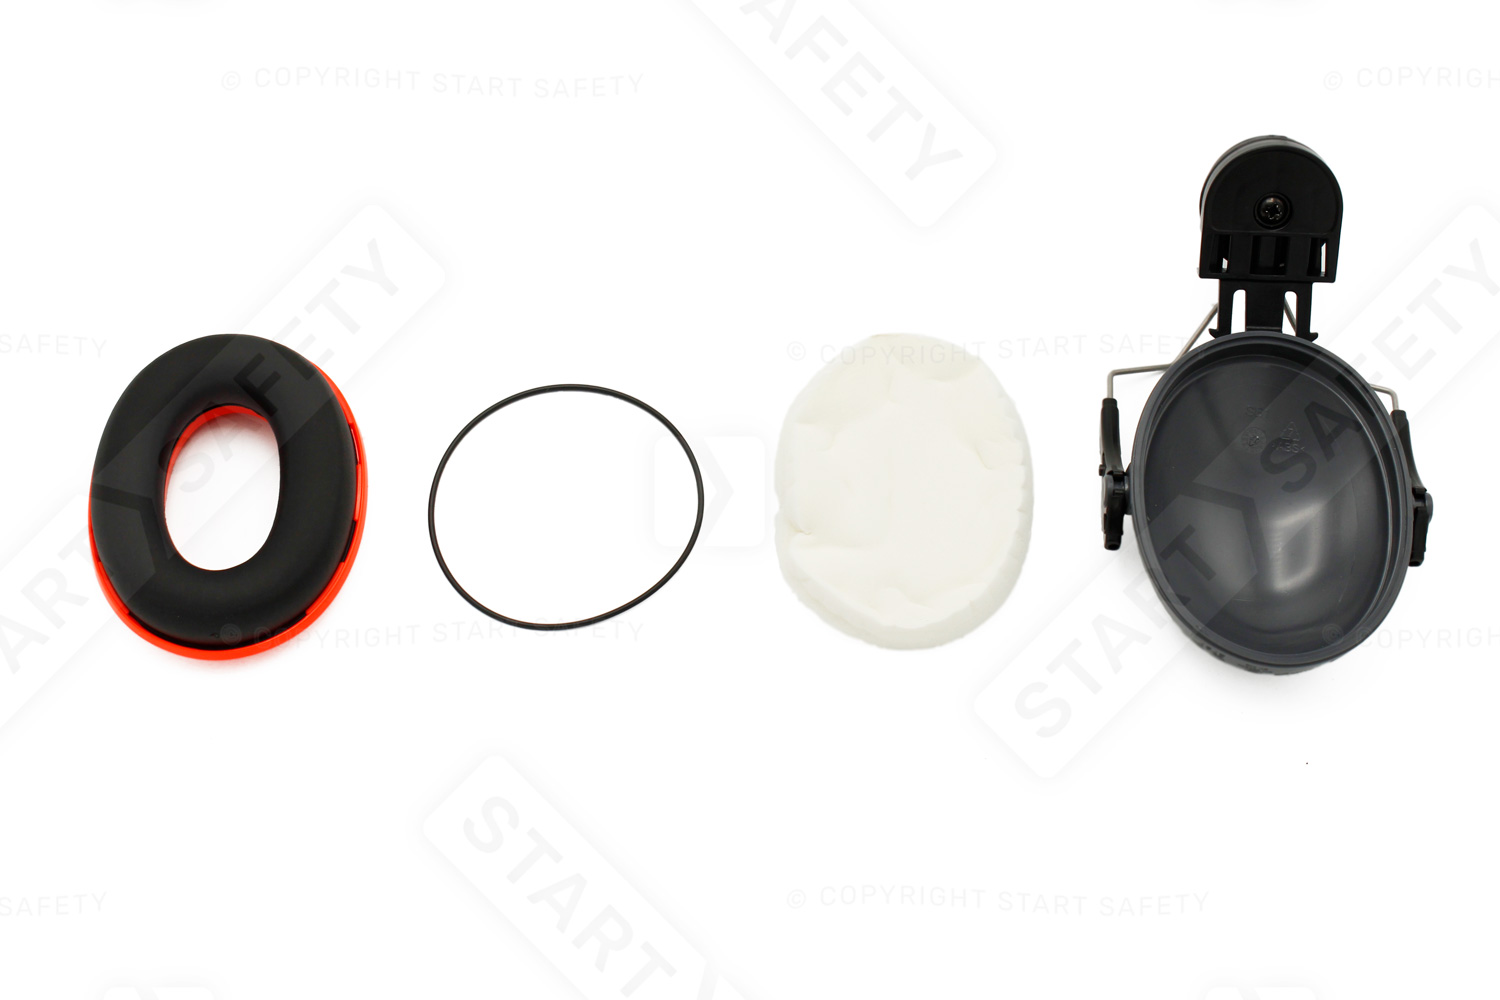 Sonis Compact Ear Defender In Parts